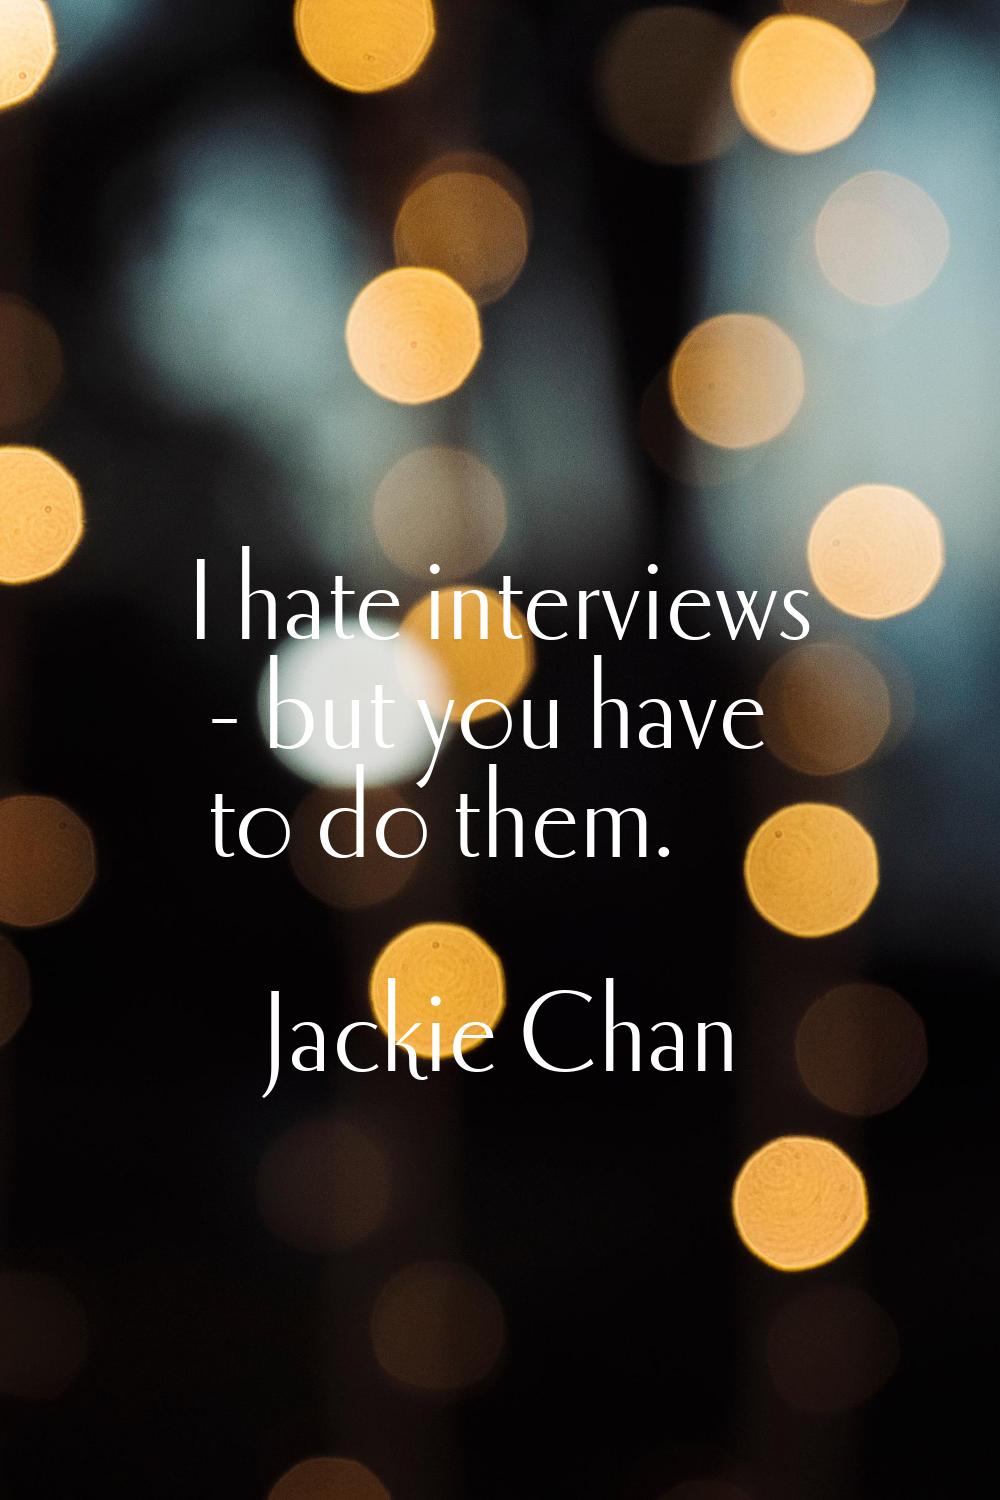 I hate interviews - but you have to do them.